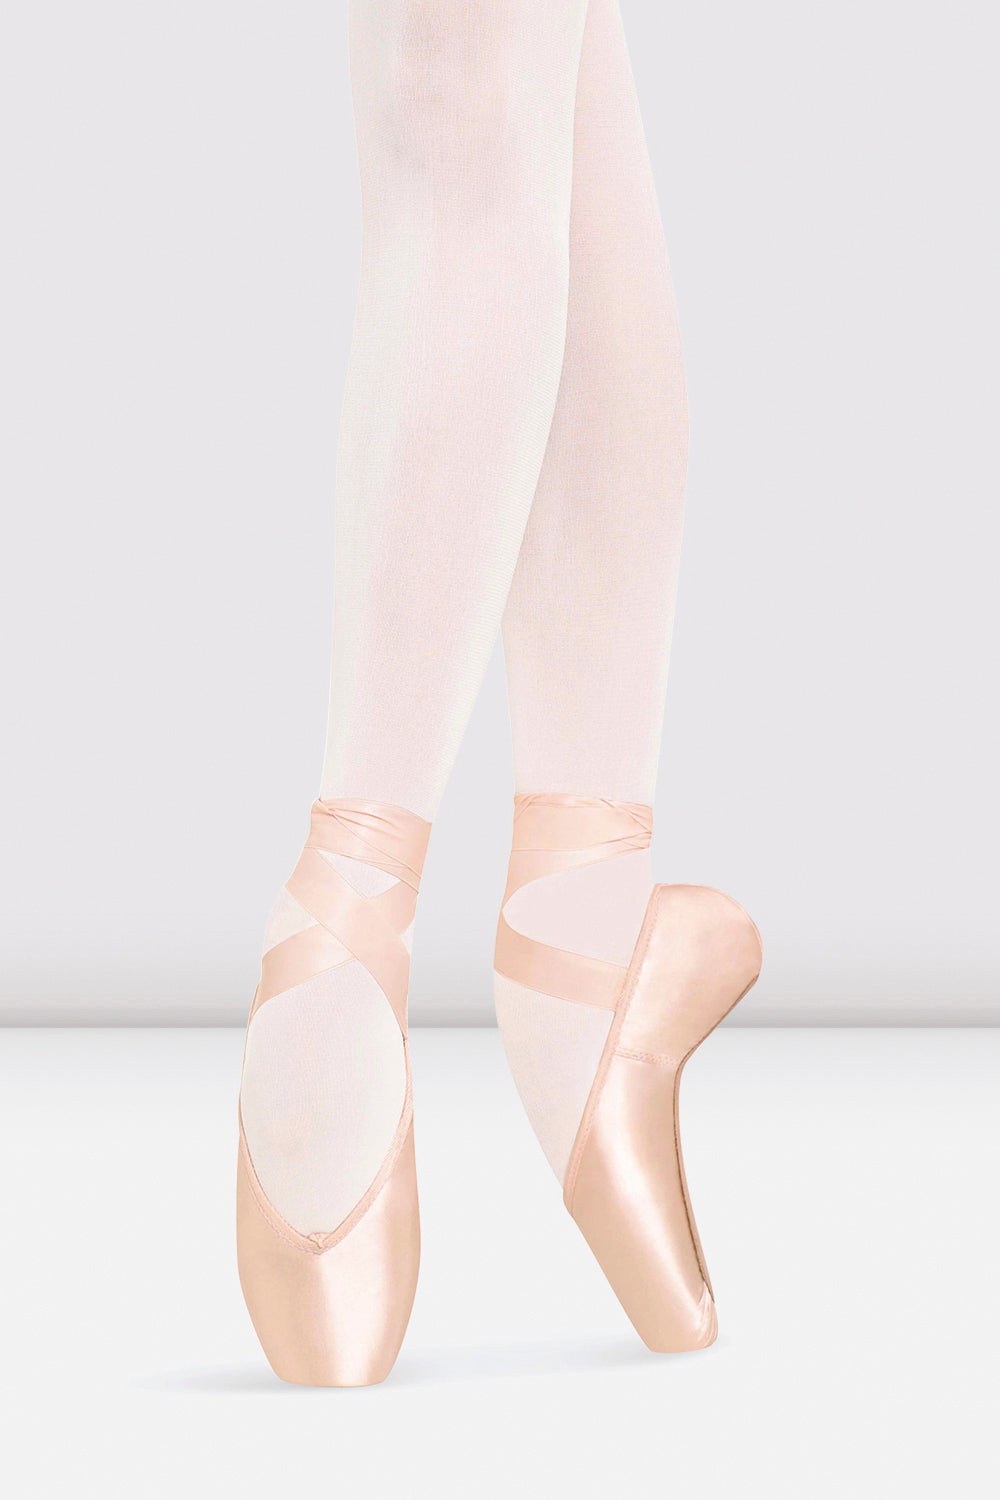 BLOCH Heritage Strong Pointe Shoes, Pink Satin